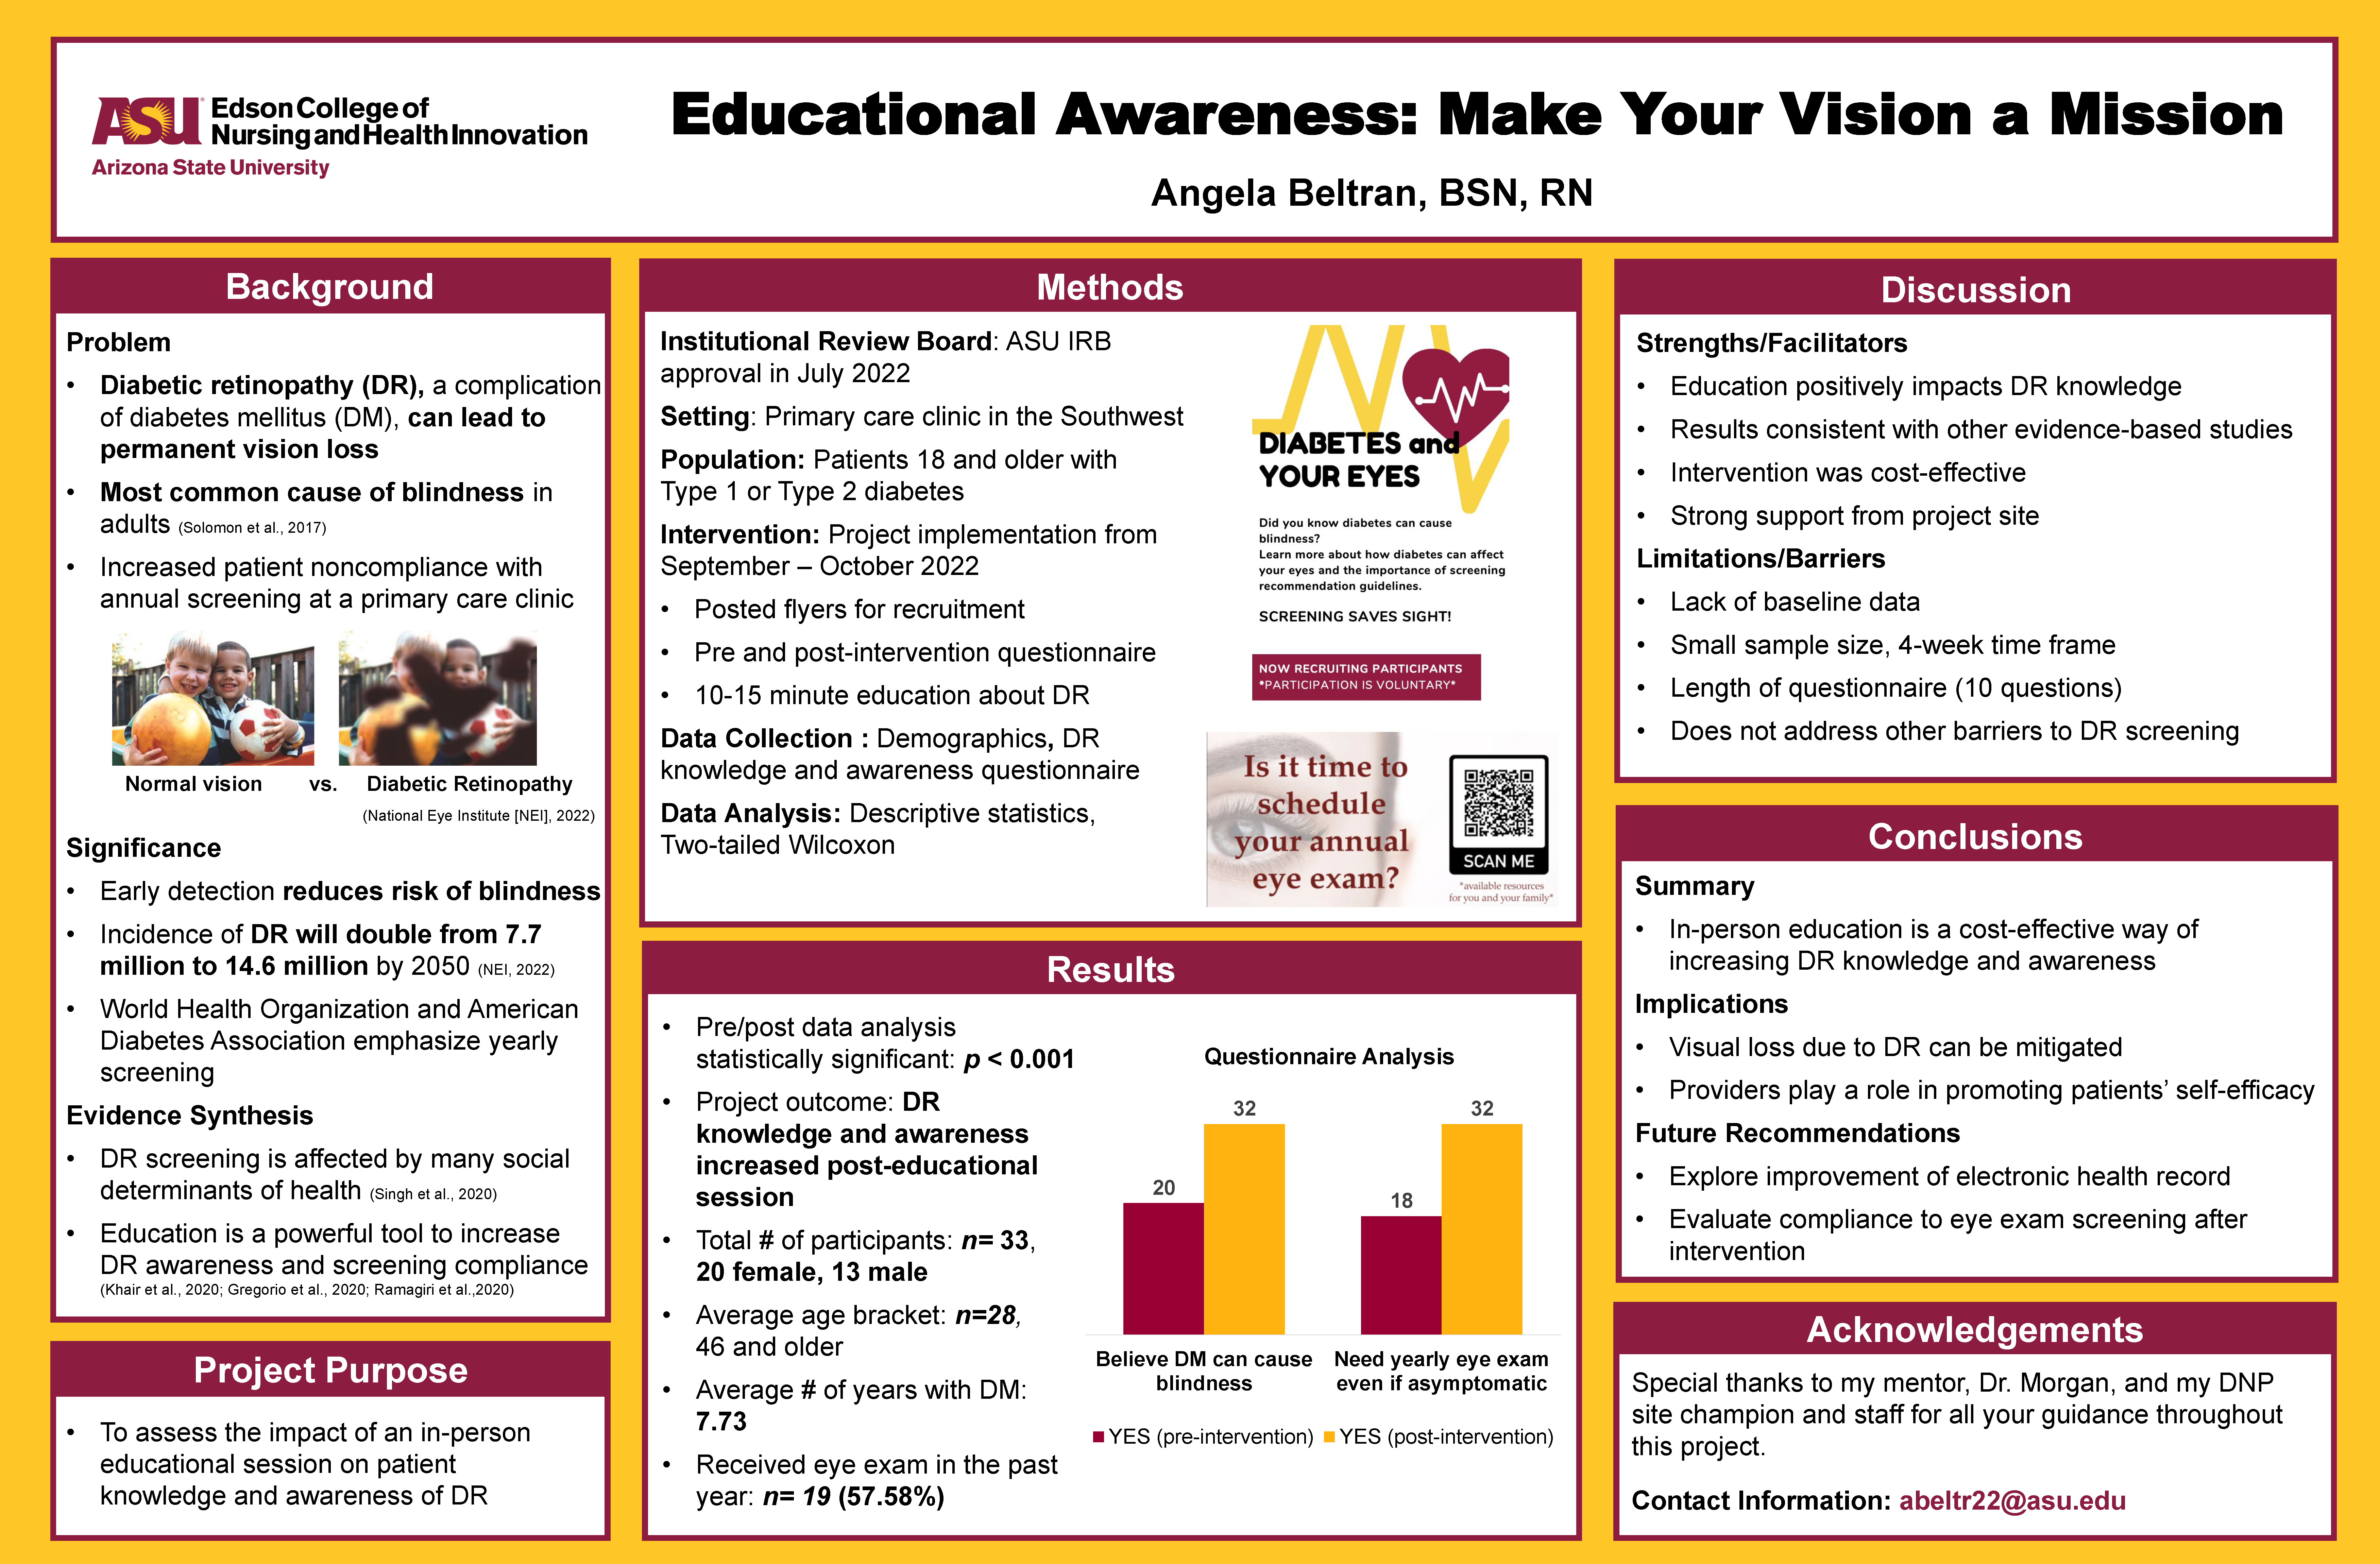 Educational Awareness: Makes your vision a mission poster